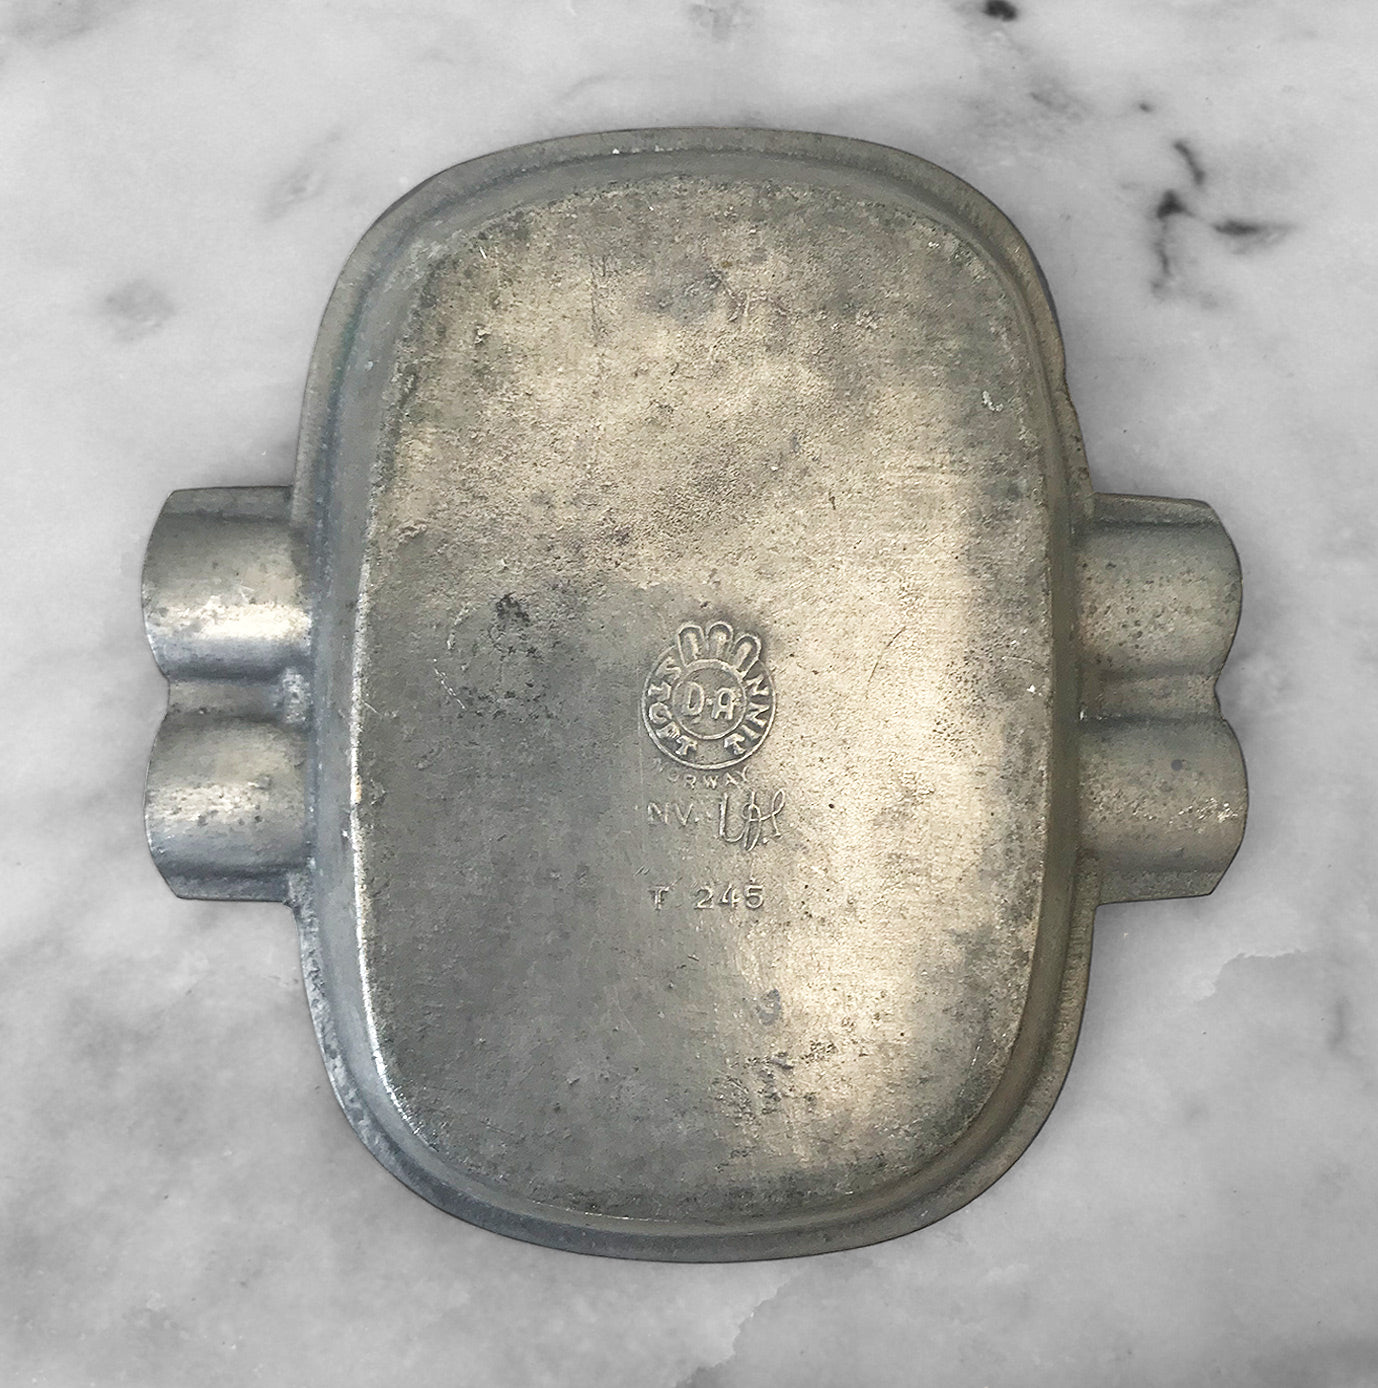 A Vintage David Anderson Norwegian Cast Pewter Cigar Ashtray with an Art Deco design to the front. Marked DA Stopt Tinn, Norway NV T245 to the back - SHOP NOW - www.intovintage.co.uk